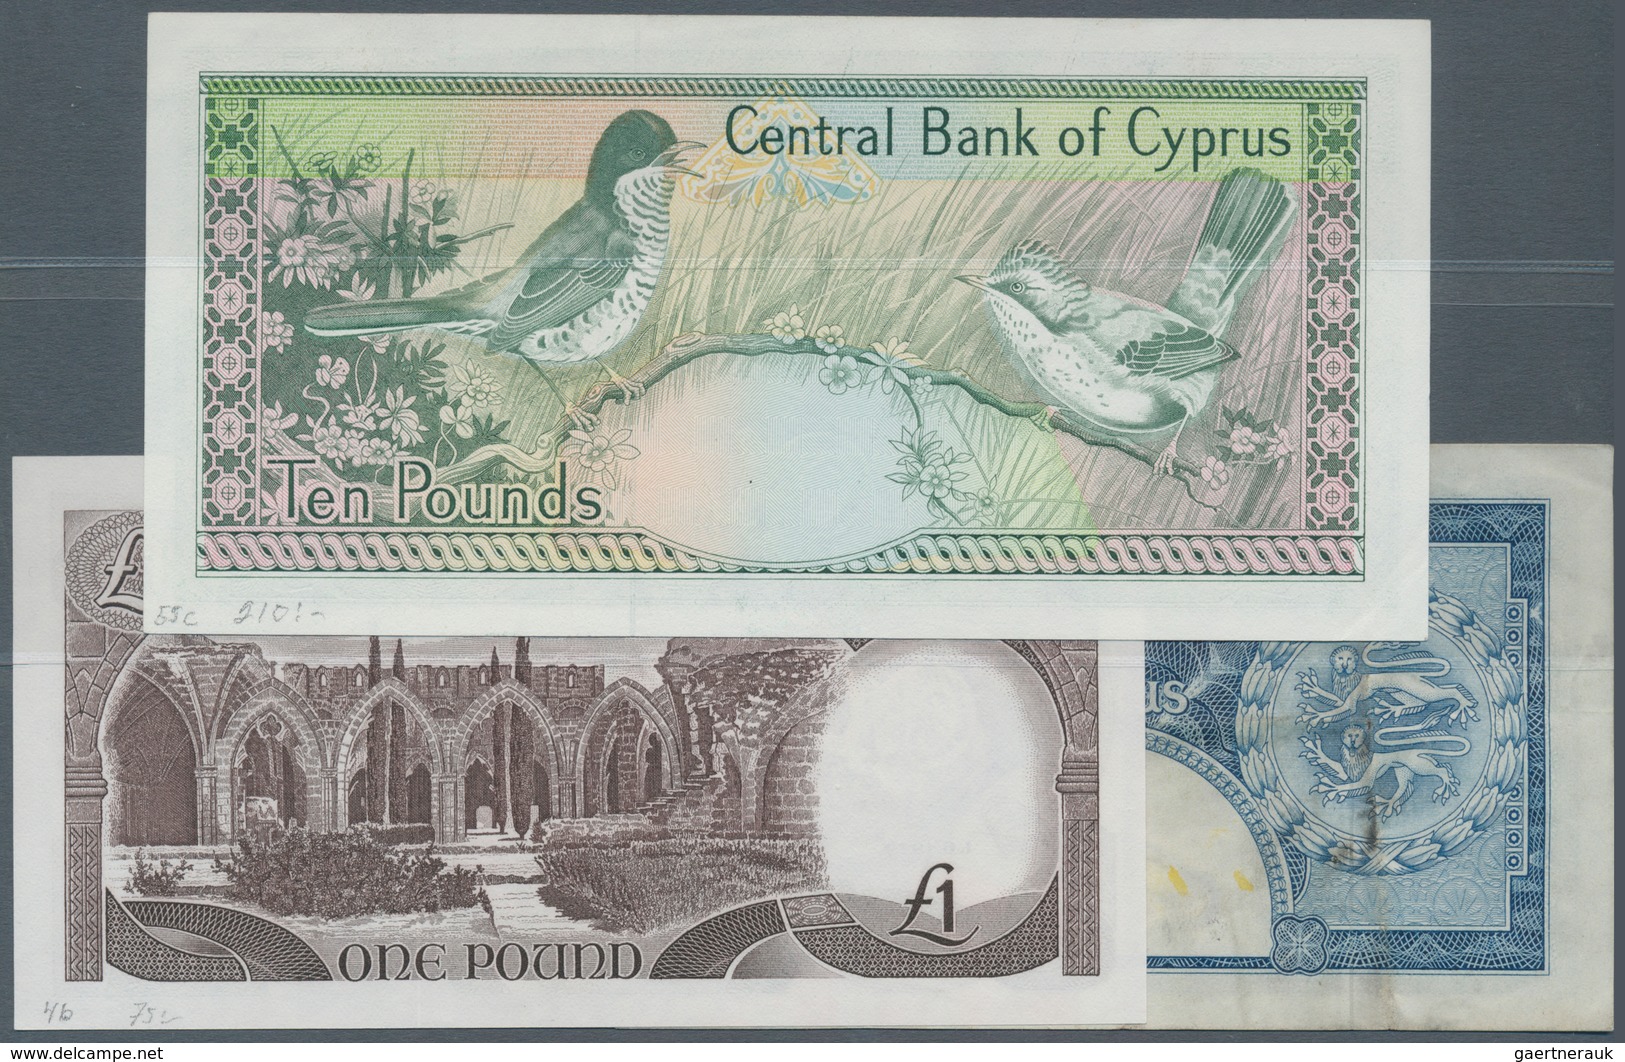 Cyprus / Zypern: Very Nice Set With 3 Banknotes 250 Mils 1955 P.33a In F+, 1 Pound 1979 P.46 In XF A - Cipro